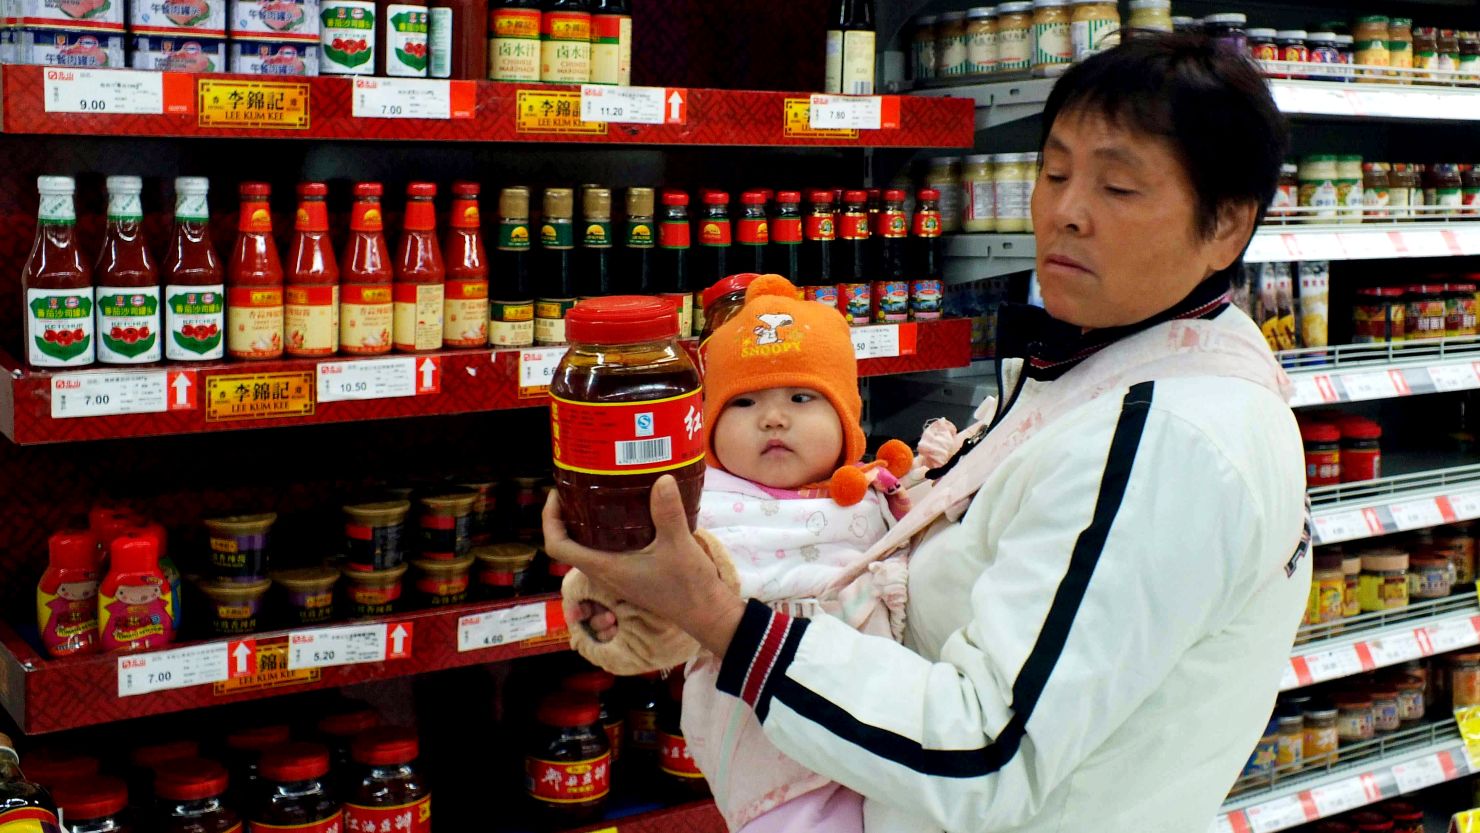 	A Chinese woman inspects a bottle of chilli sauce at a supermarket in Yichang, central China's Hubei province on November 9, 2011.